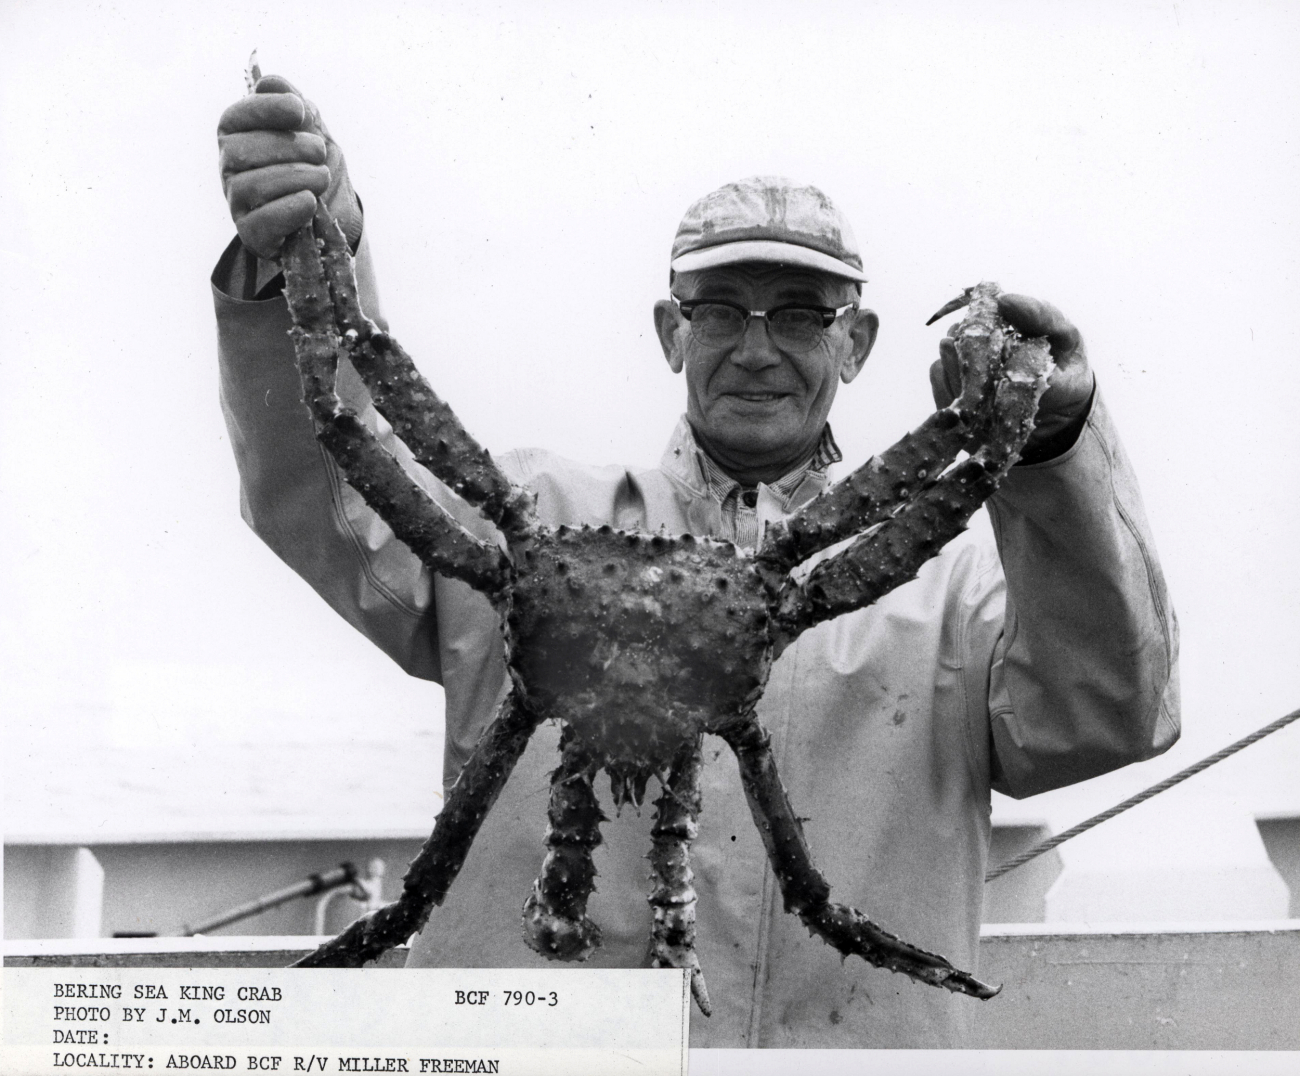 Bering Sea king crab average 7 to 8 pounds total weight; recoverable meat isbetween 20 and 25 percent